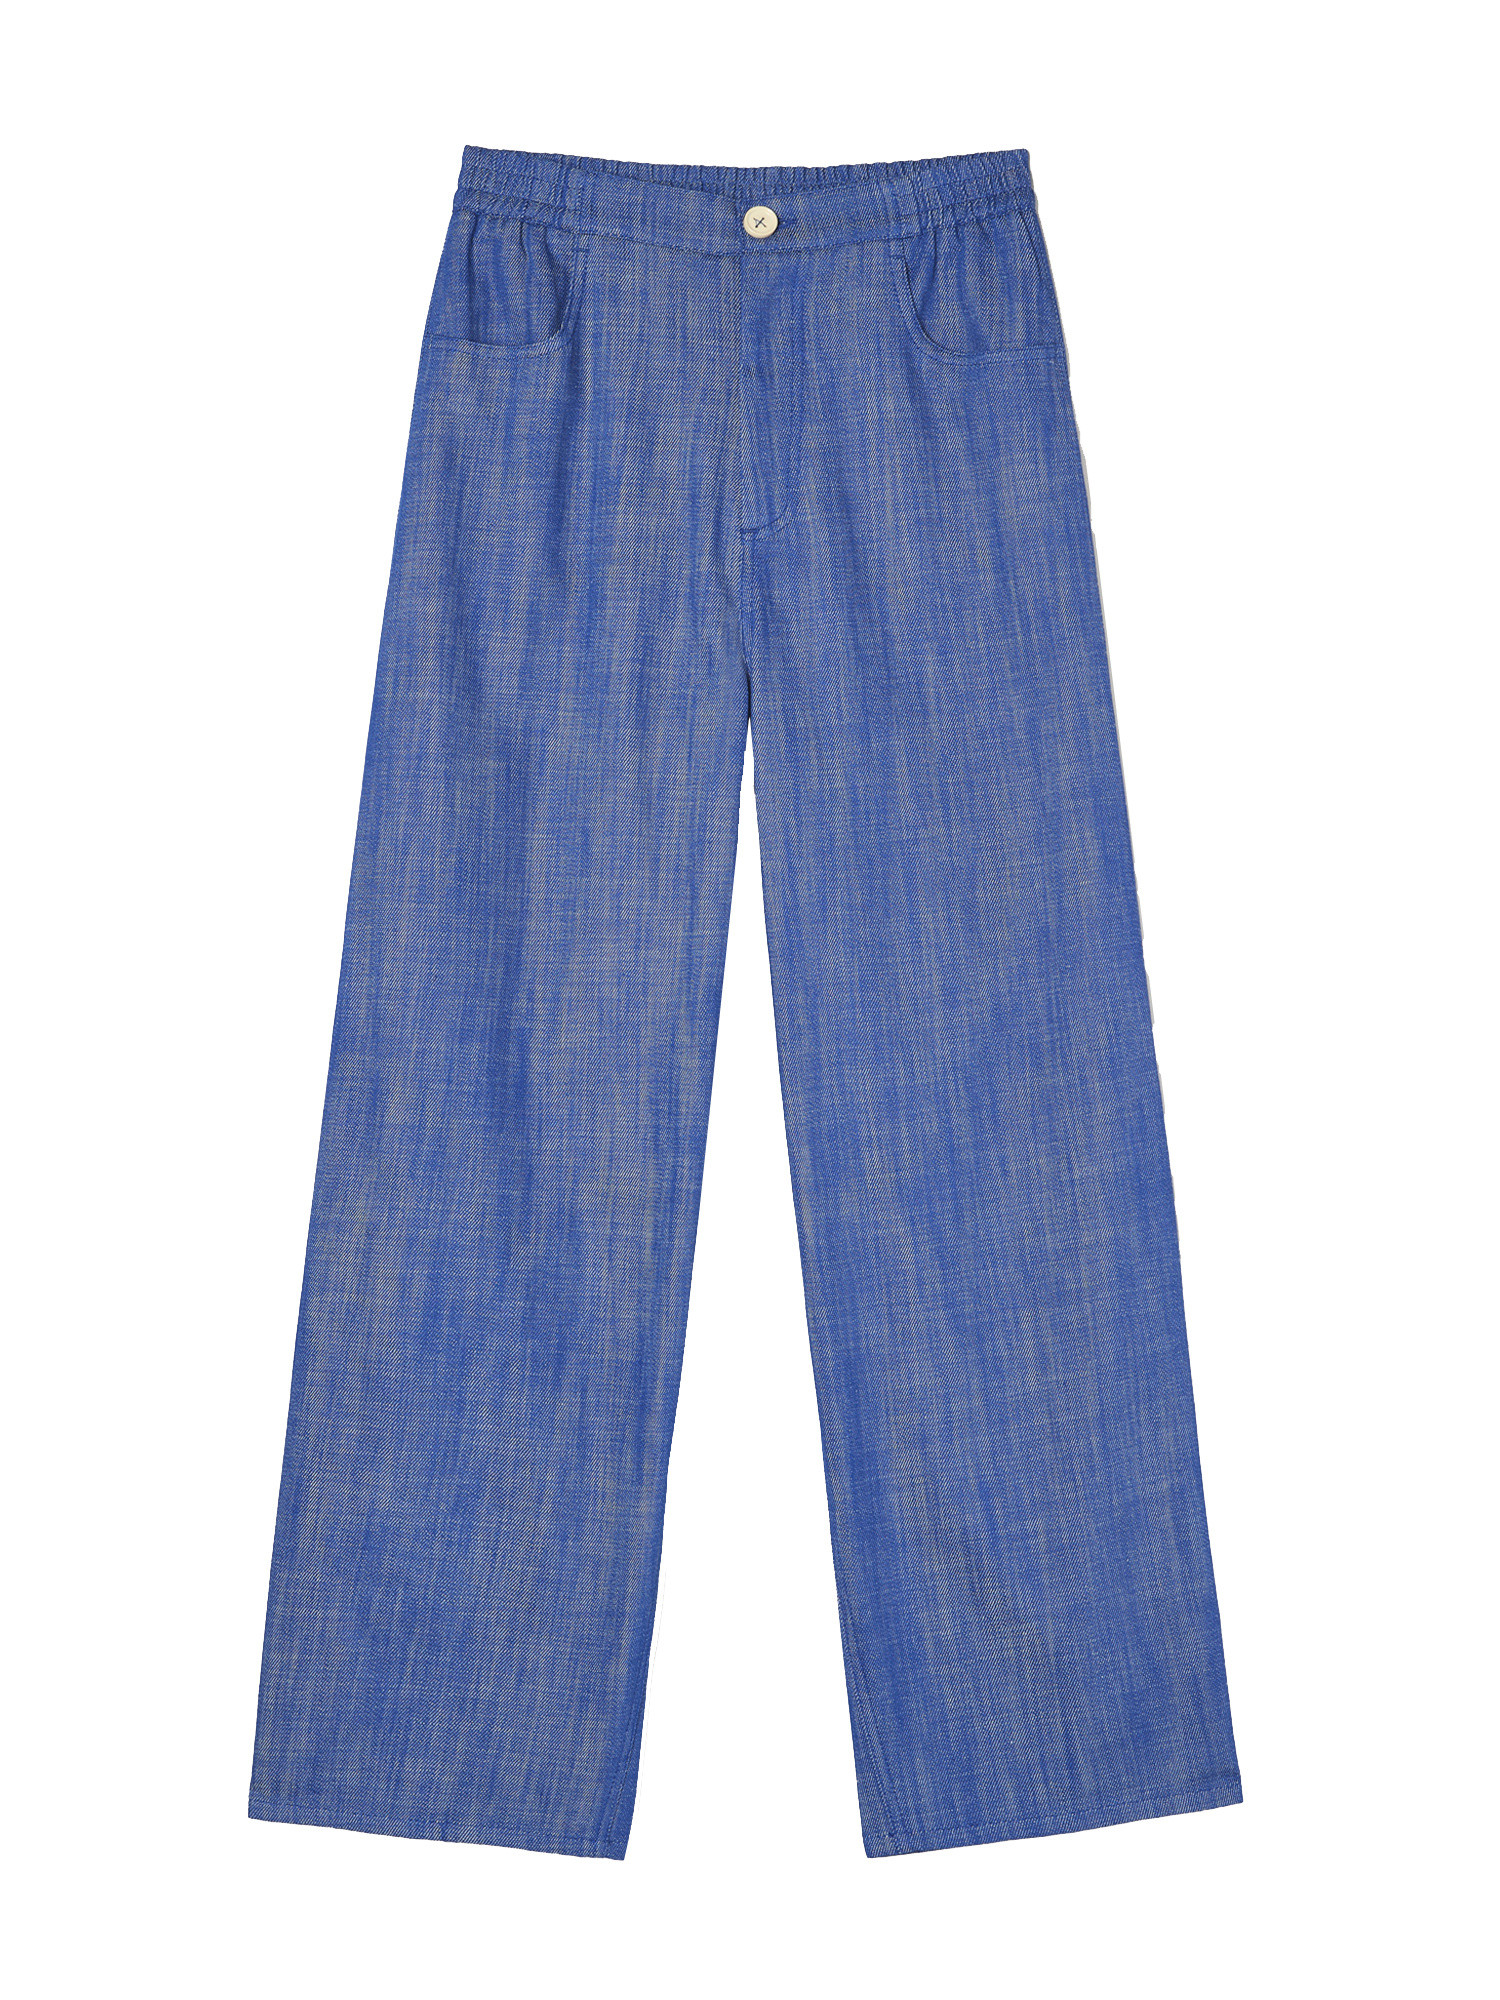 Attic and Barn - Cortina trousers in cotton, Blue Cornflower, large image number 0